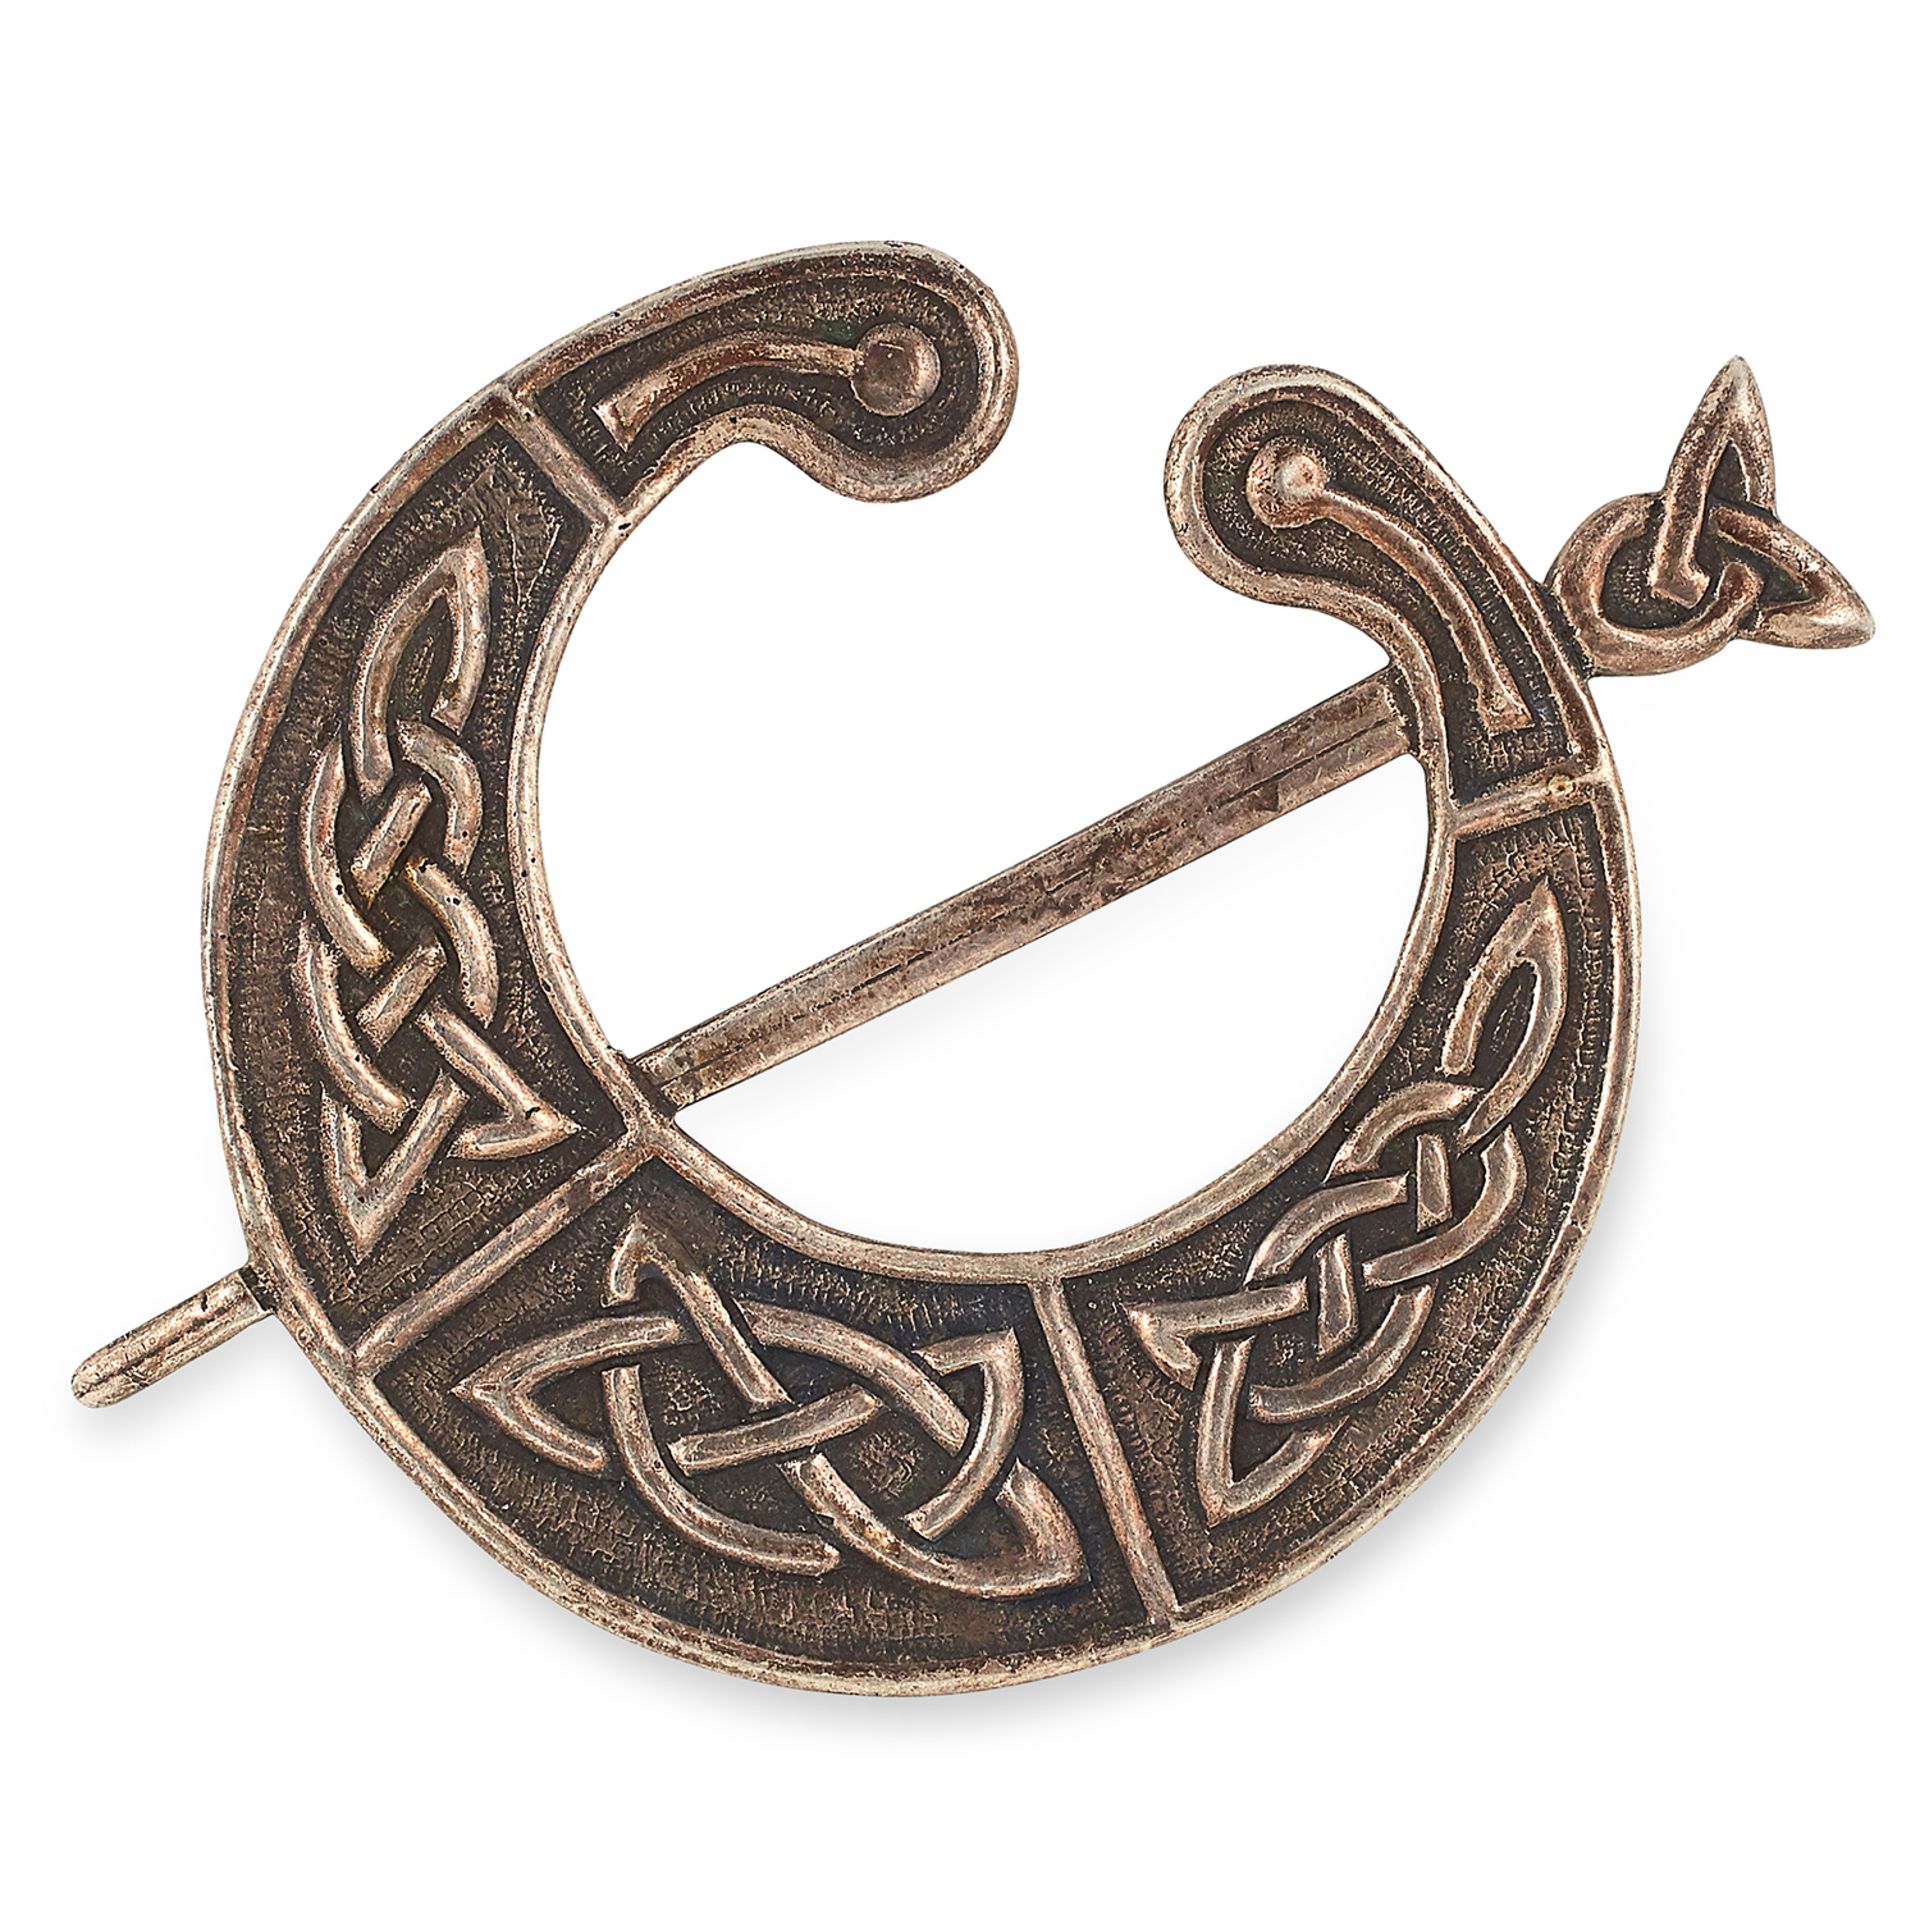 CELTIC STERLING SILVER BROOCH, IONA with Celtic motif, stamped Iona, 9cm, 29.3g.